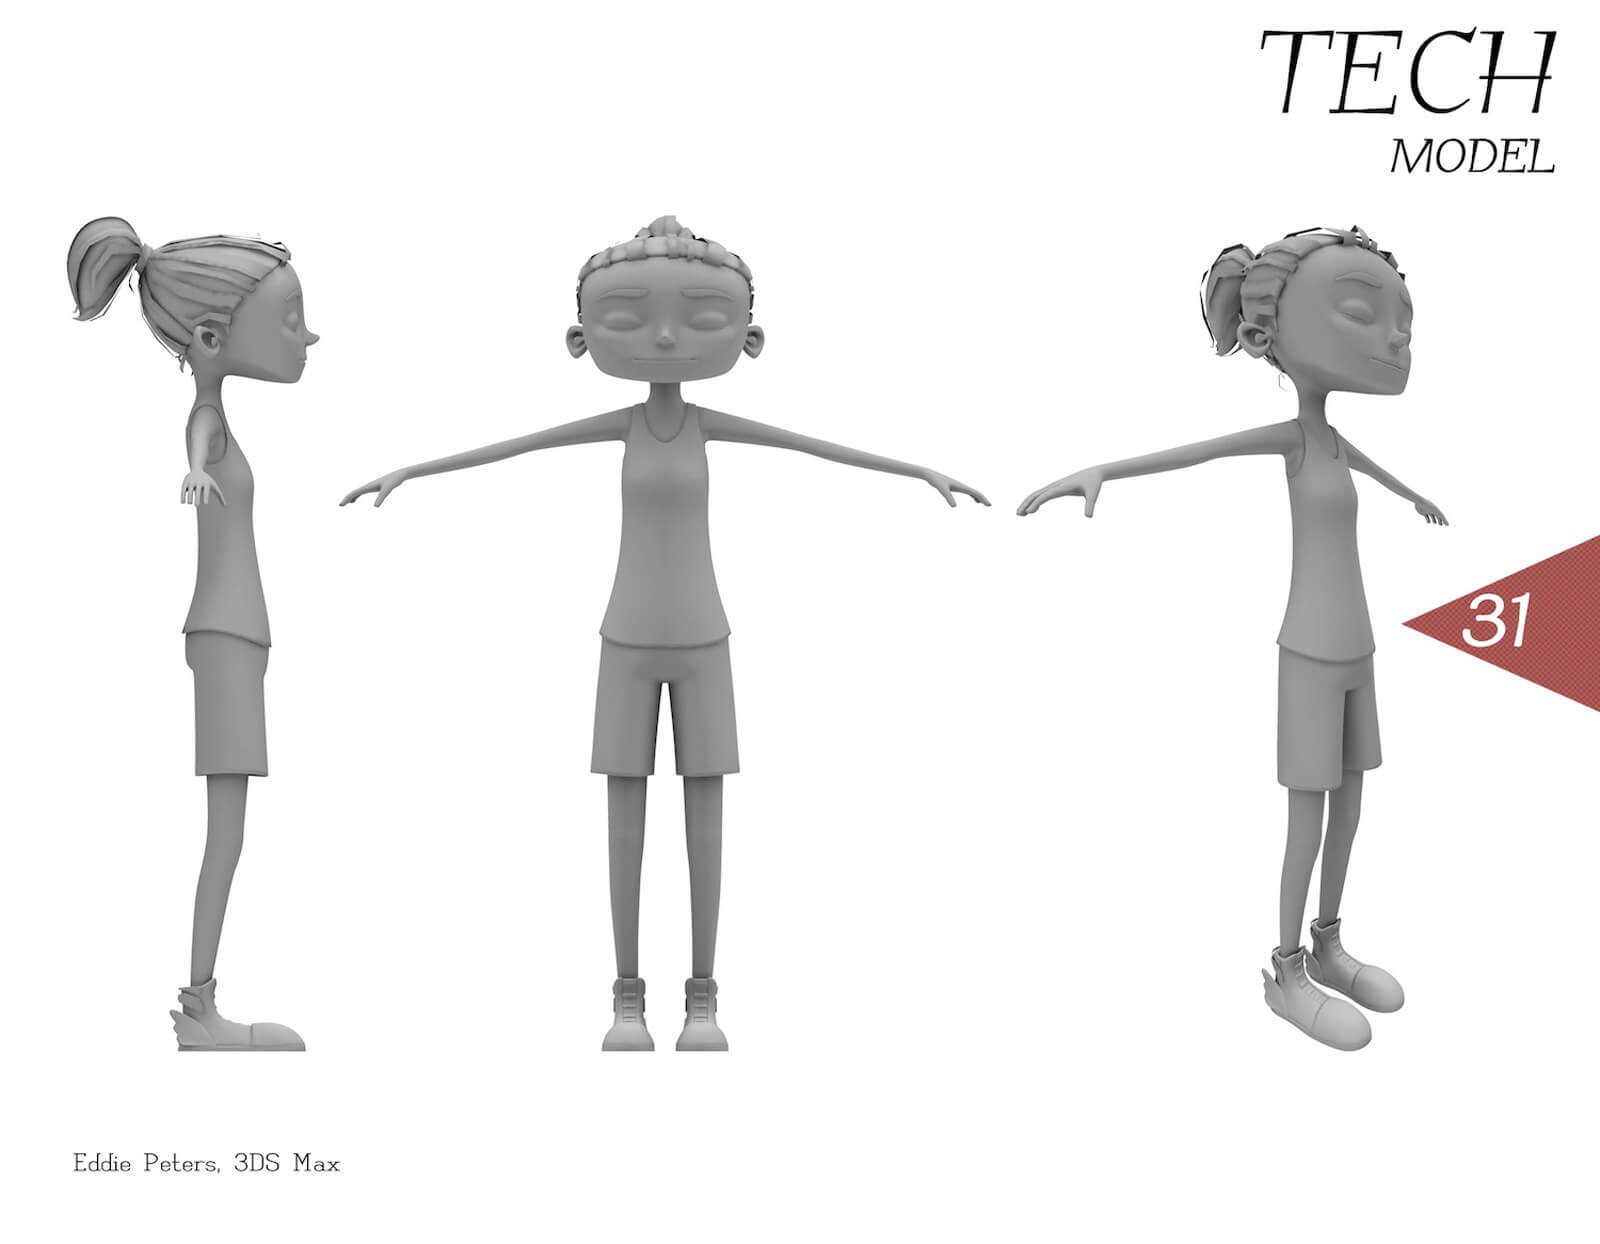 3D model of a girl with in a tank top and shorts from different angles. The color of the character is gray.